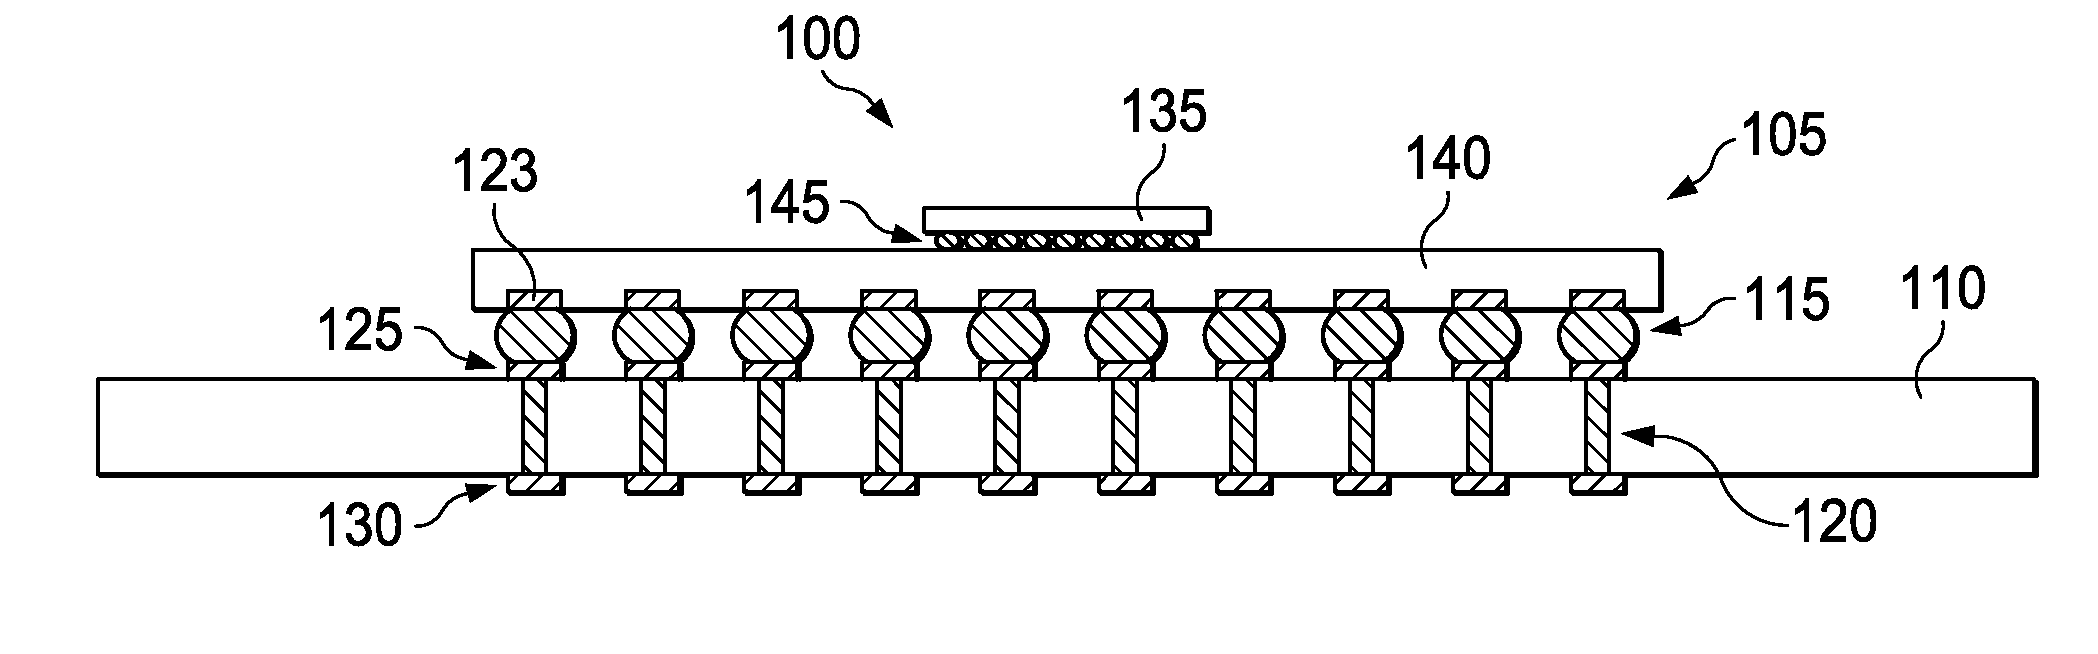 Method and apparatus for testing interconnection reliability of a ball grid array on a testing printed circuit board